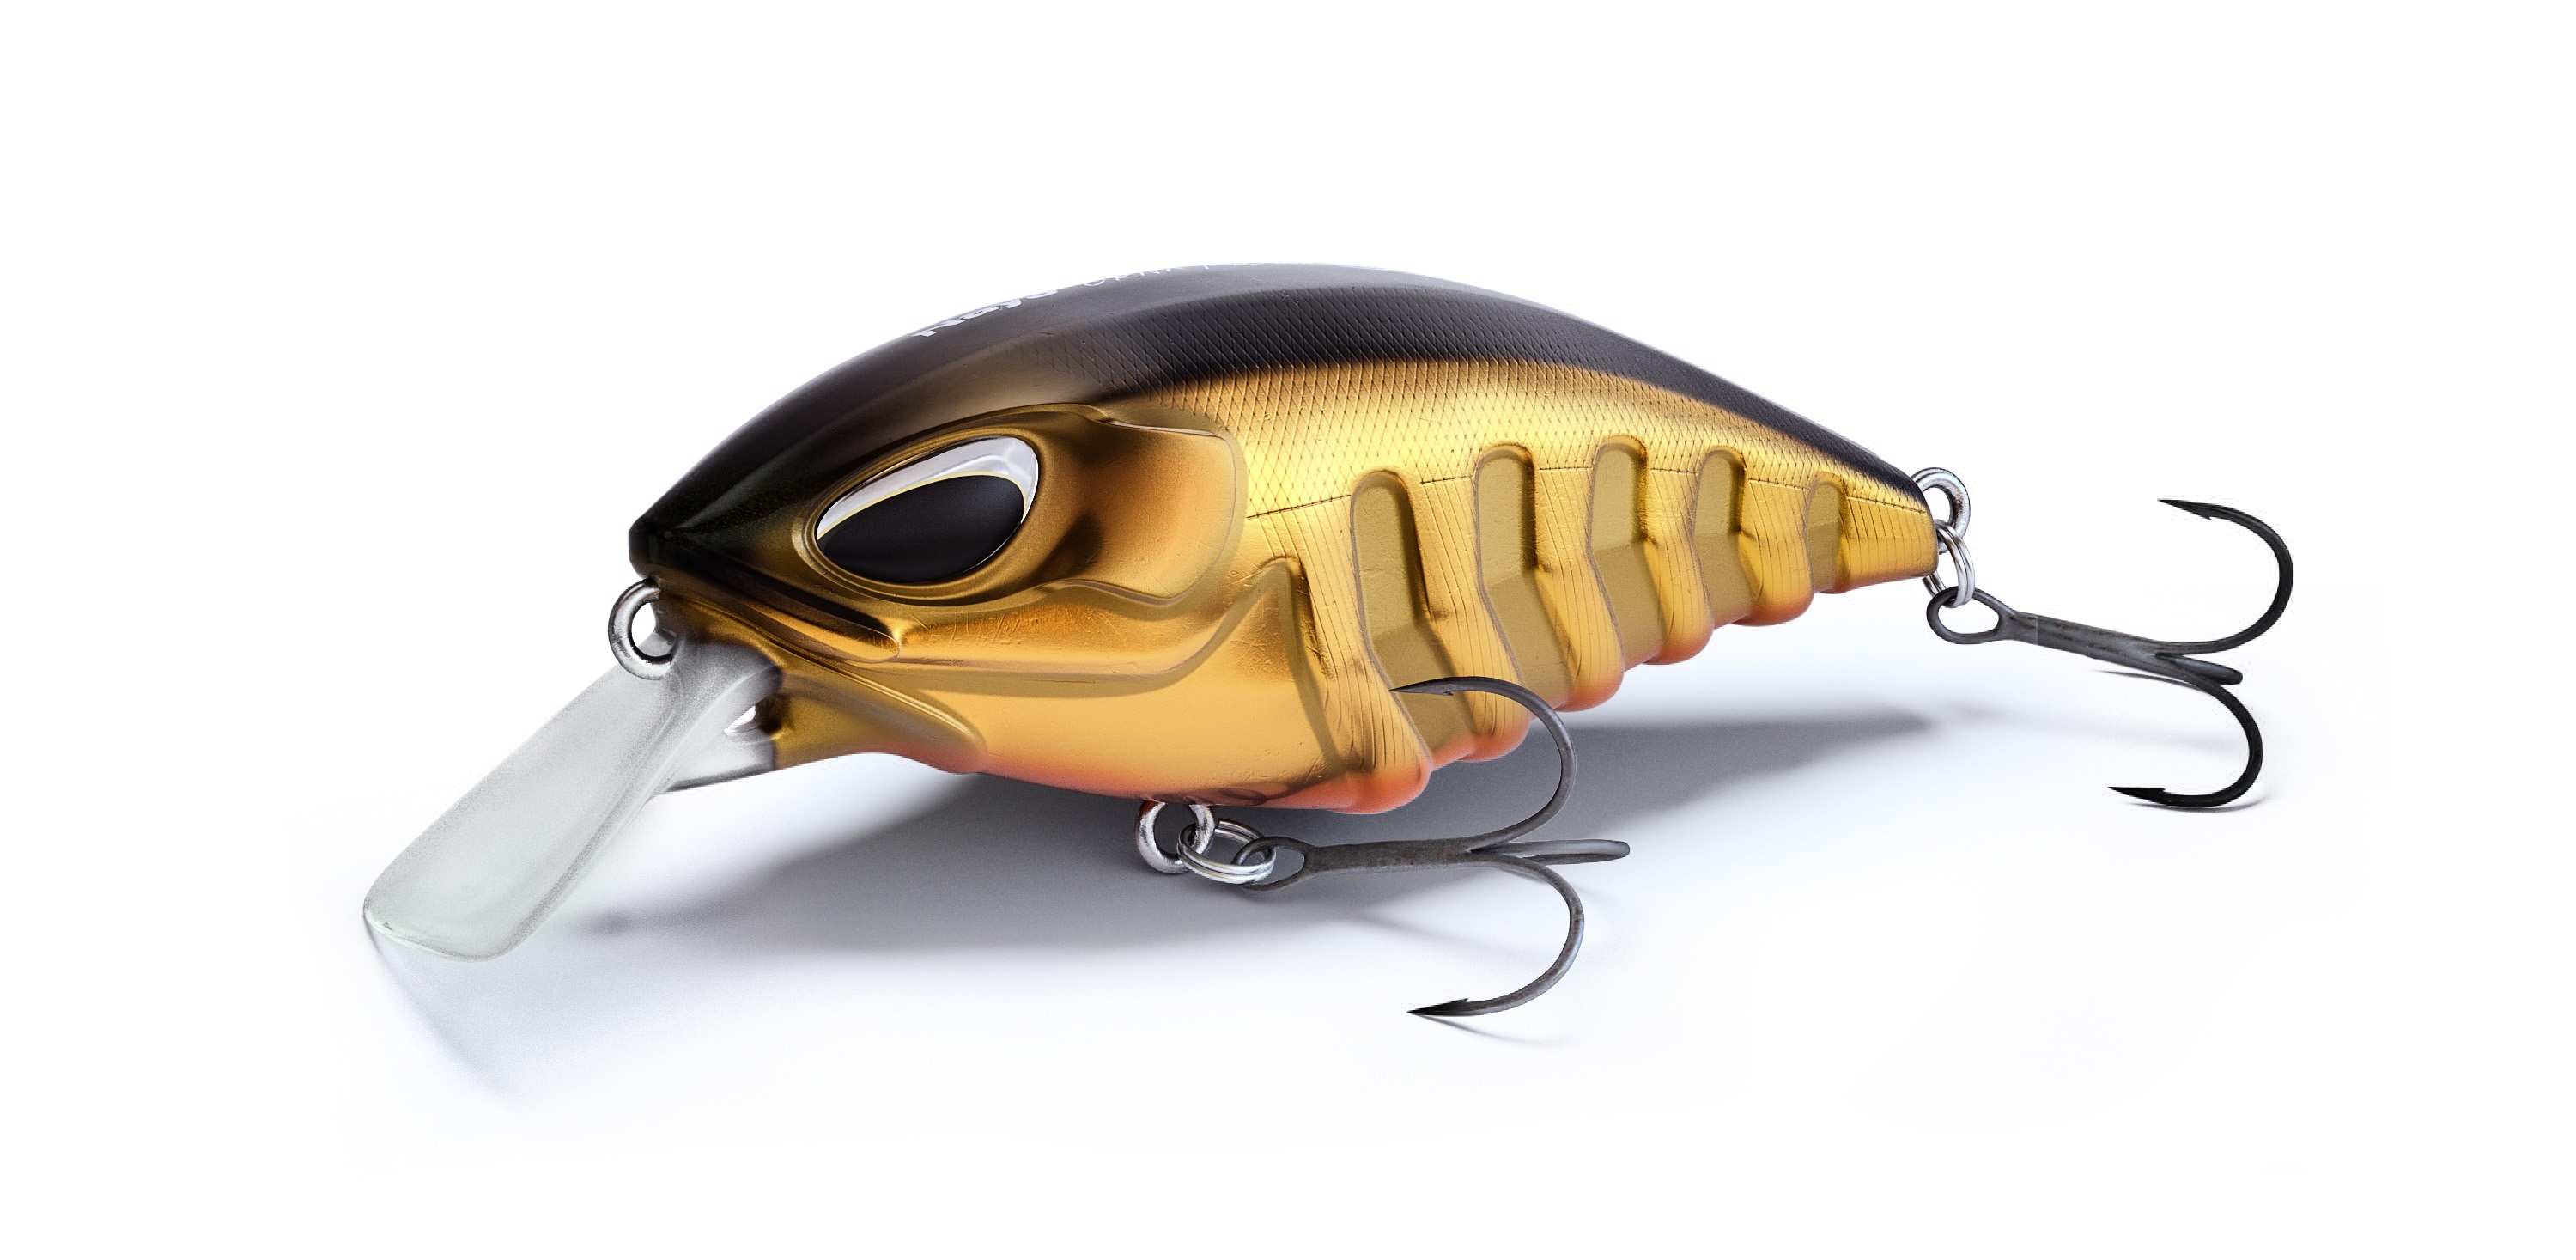 Nays CRNK 75 SR Lure 7.5cm (19.2g) - S-15